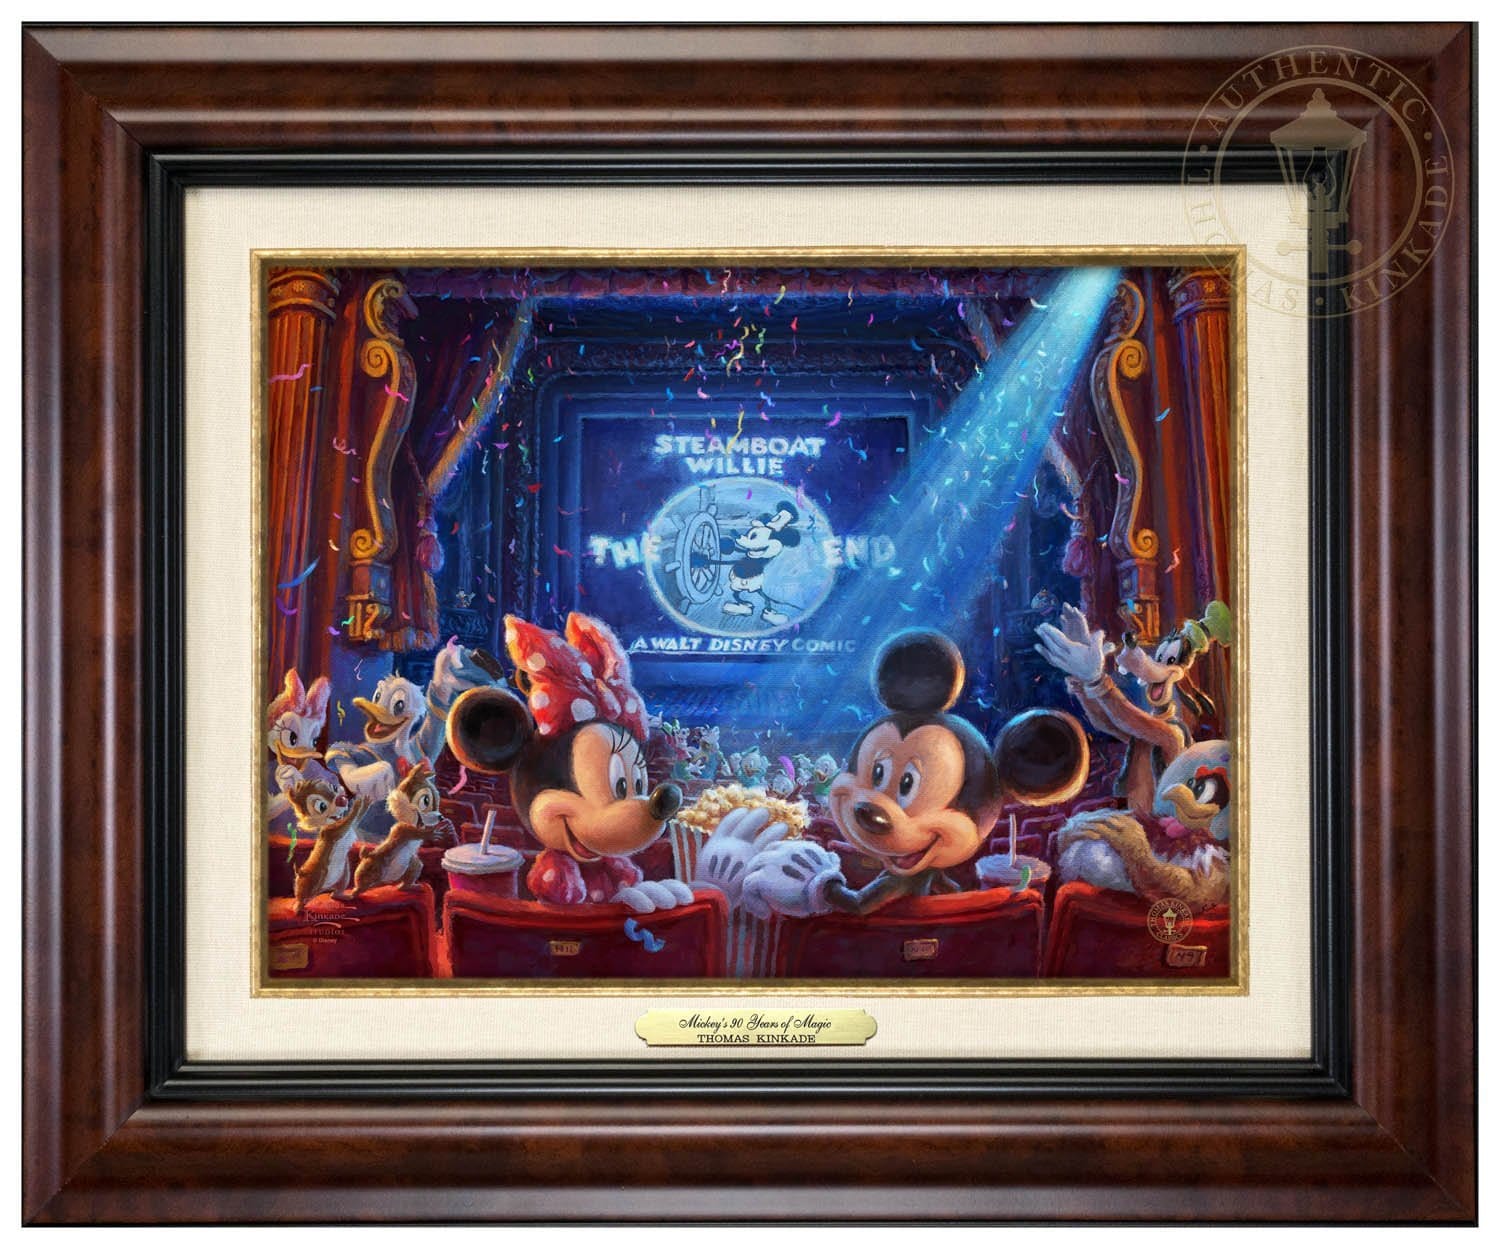 Minnie Mouse, Mickey Mouse’s original co-star from Steamboat Willie, has invited some of their most treasured friends to celebrate the film’s 90th anniversary - Burl Frame